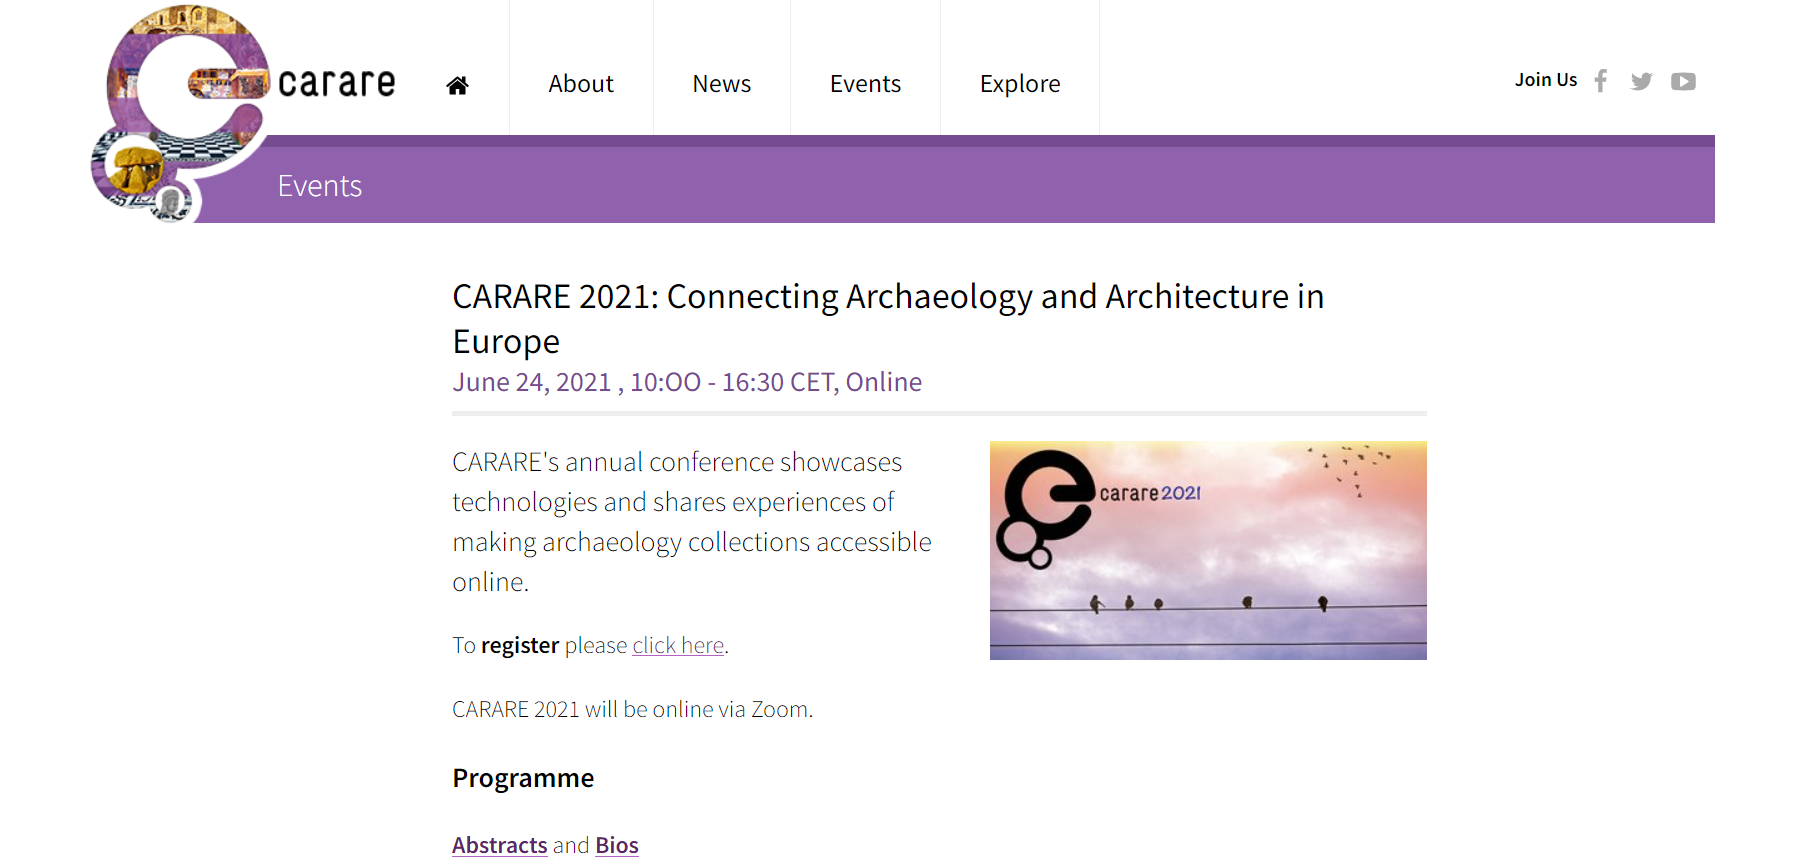 CARARE 2021: Connecting Archaeology and Architecture in Europe. Presentation: “Digital 3D Documentation of Cypriot Cultural Heritage Monuments and Sites